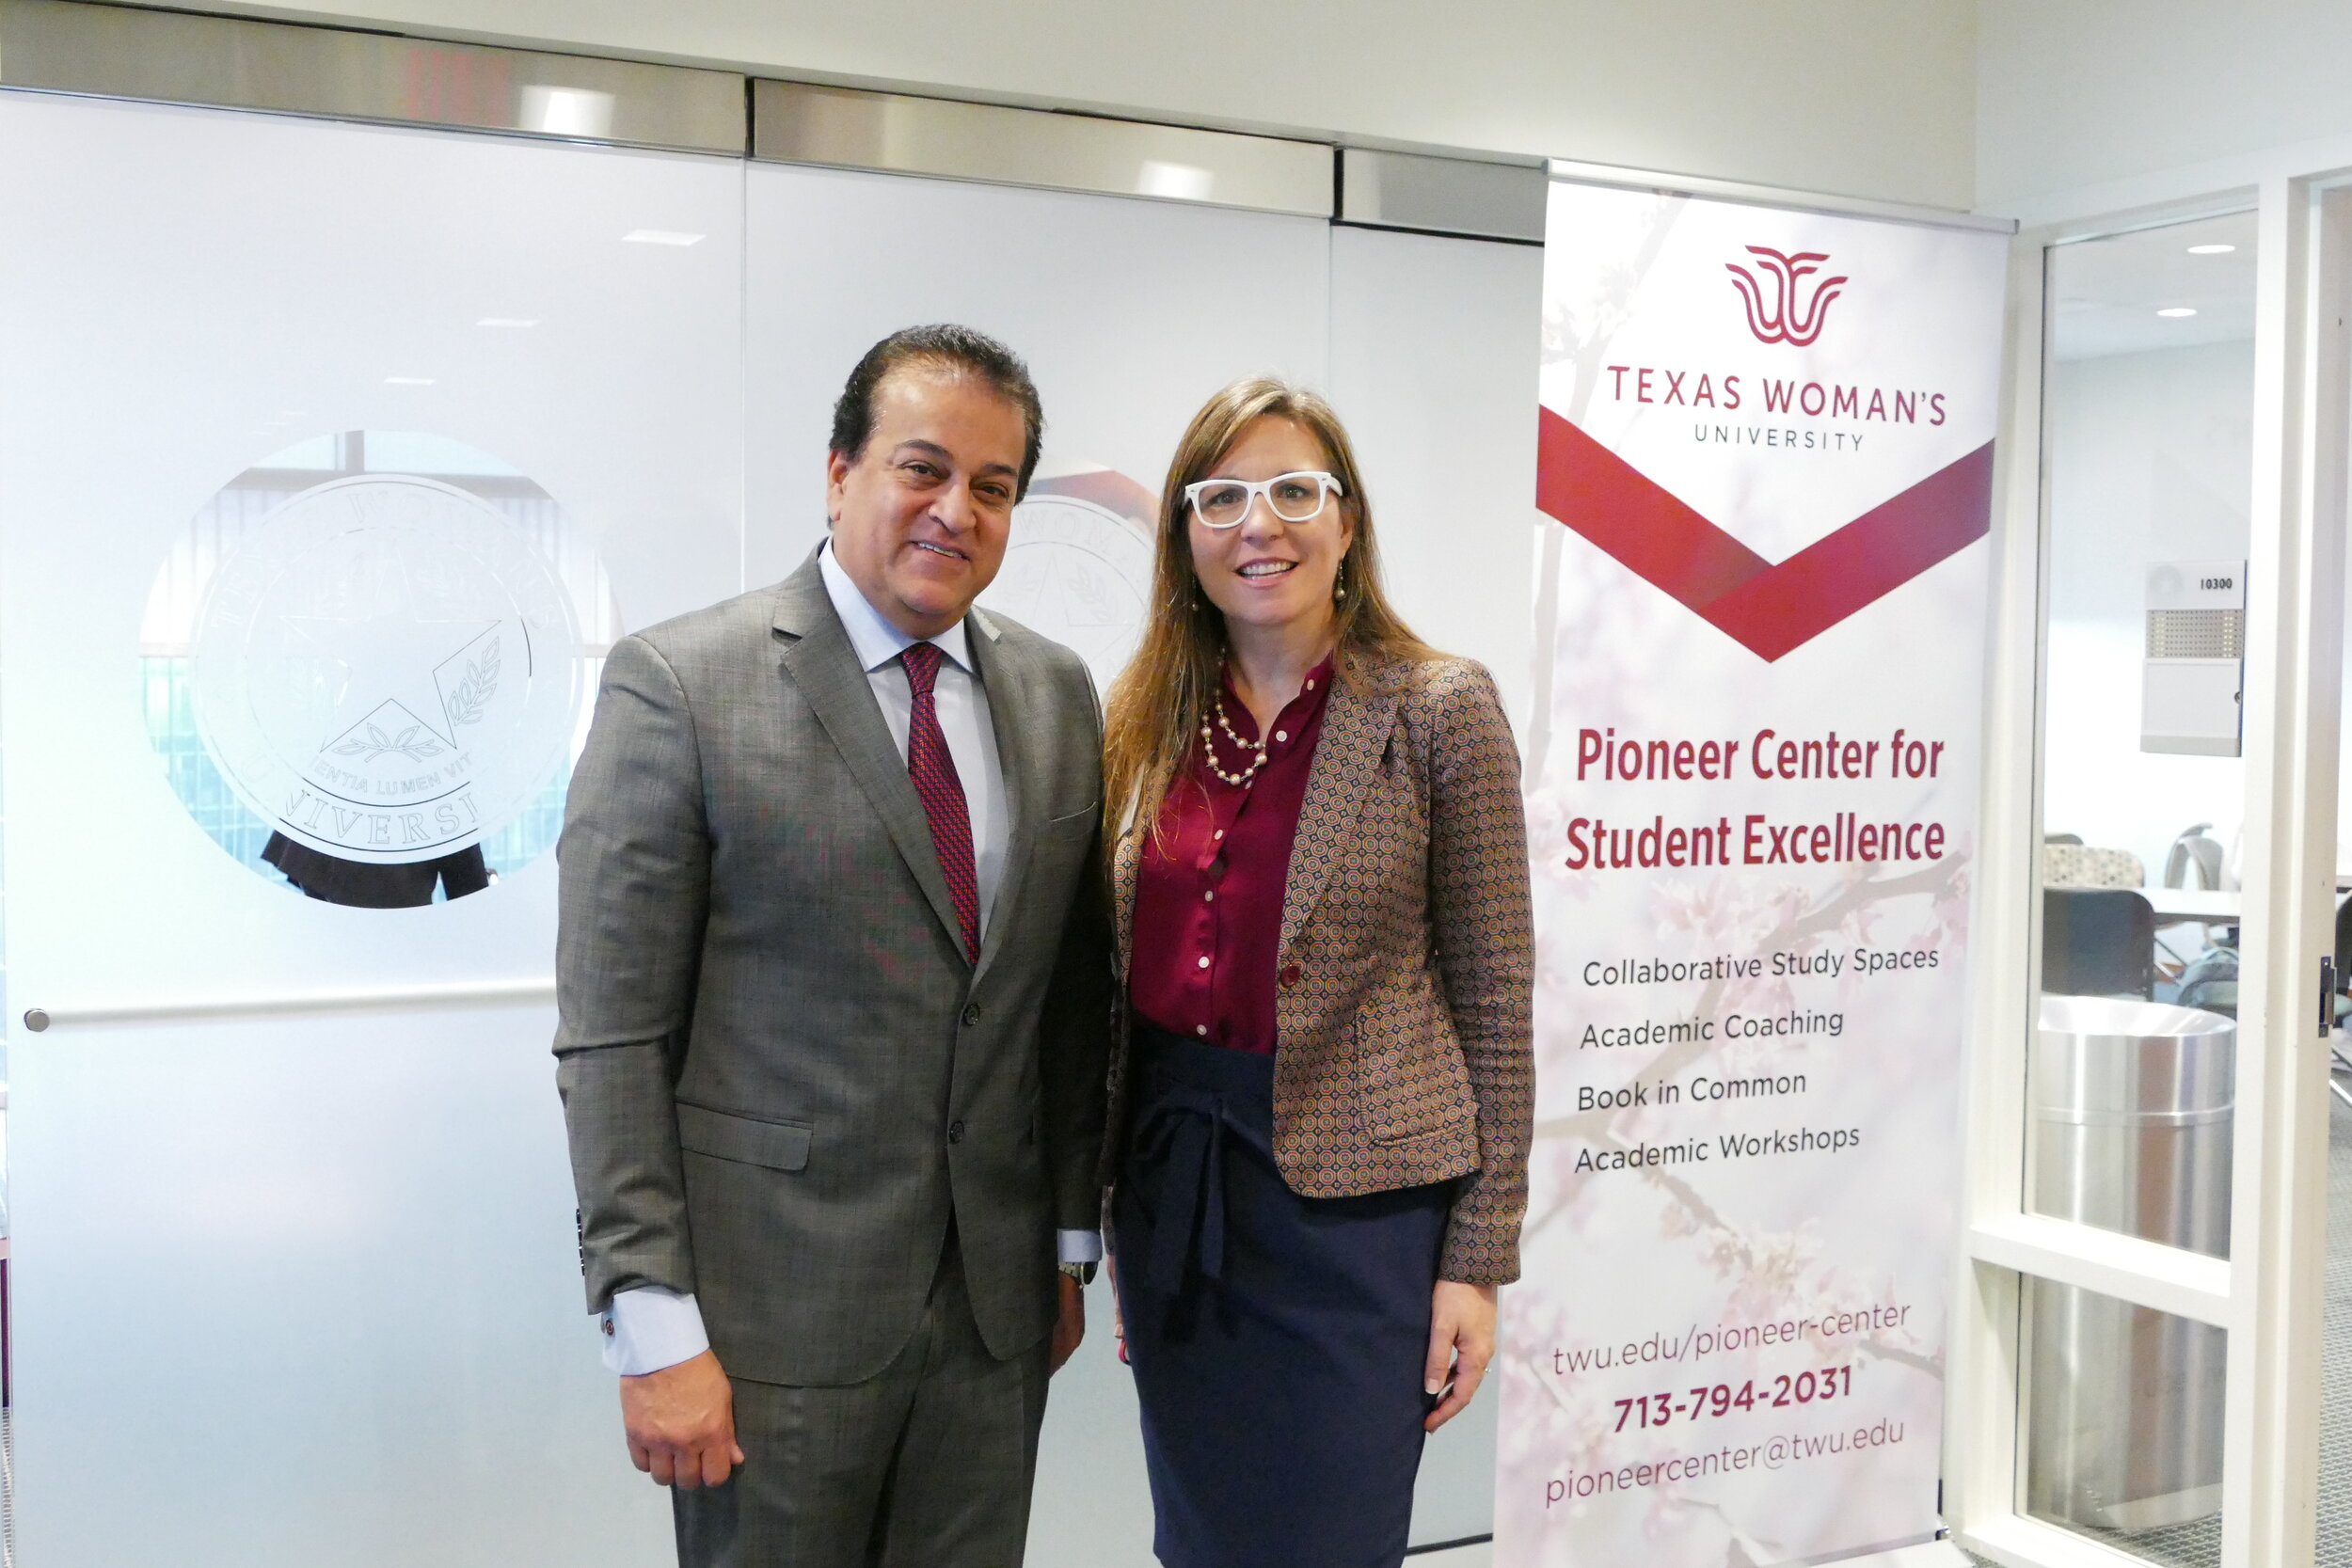 TIEC and Texas Woman’s University host the Egyptian Minister of Higher Education visit to Texas.